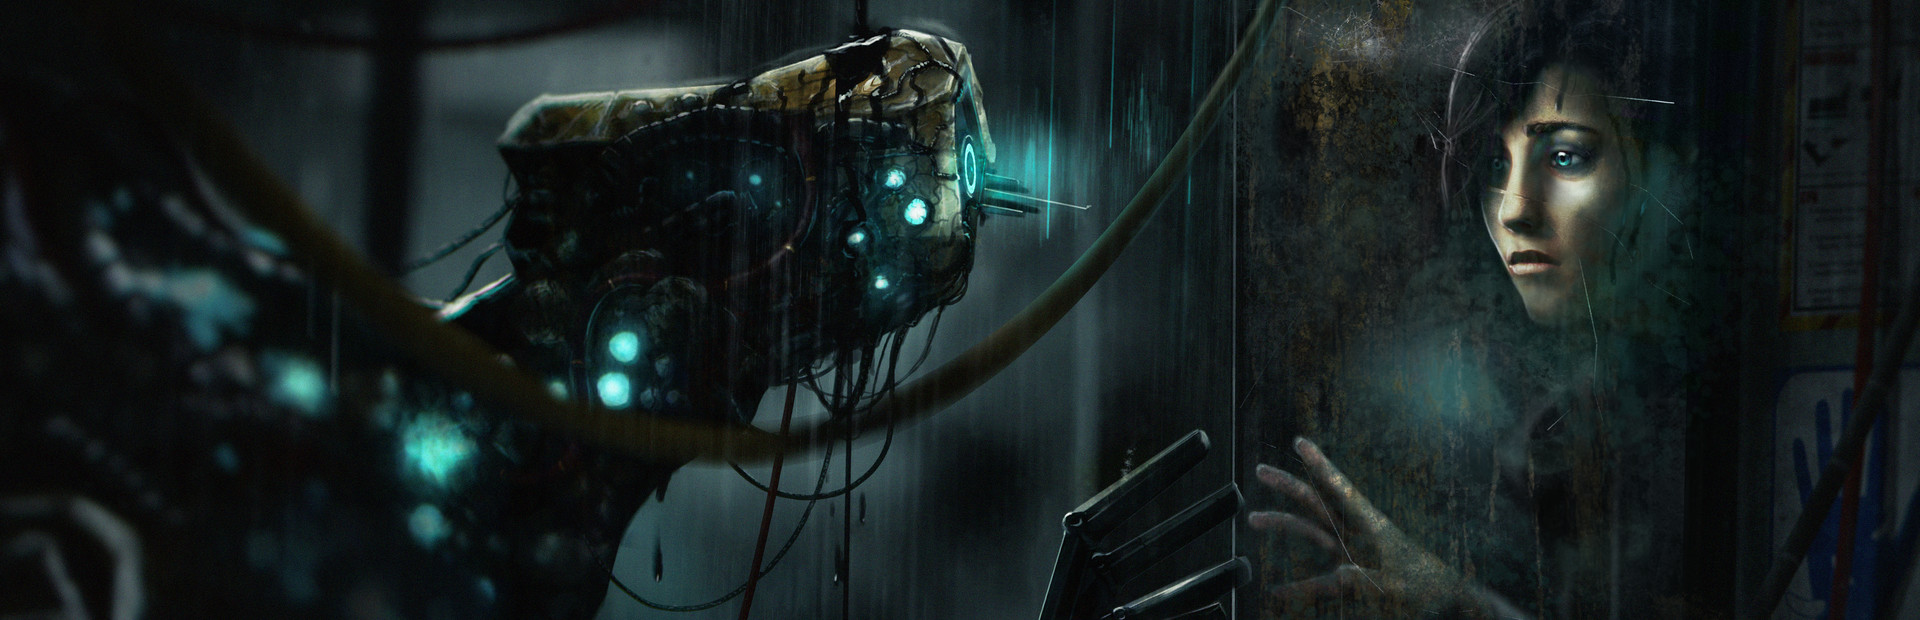 SOMA cover image